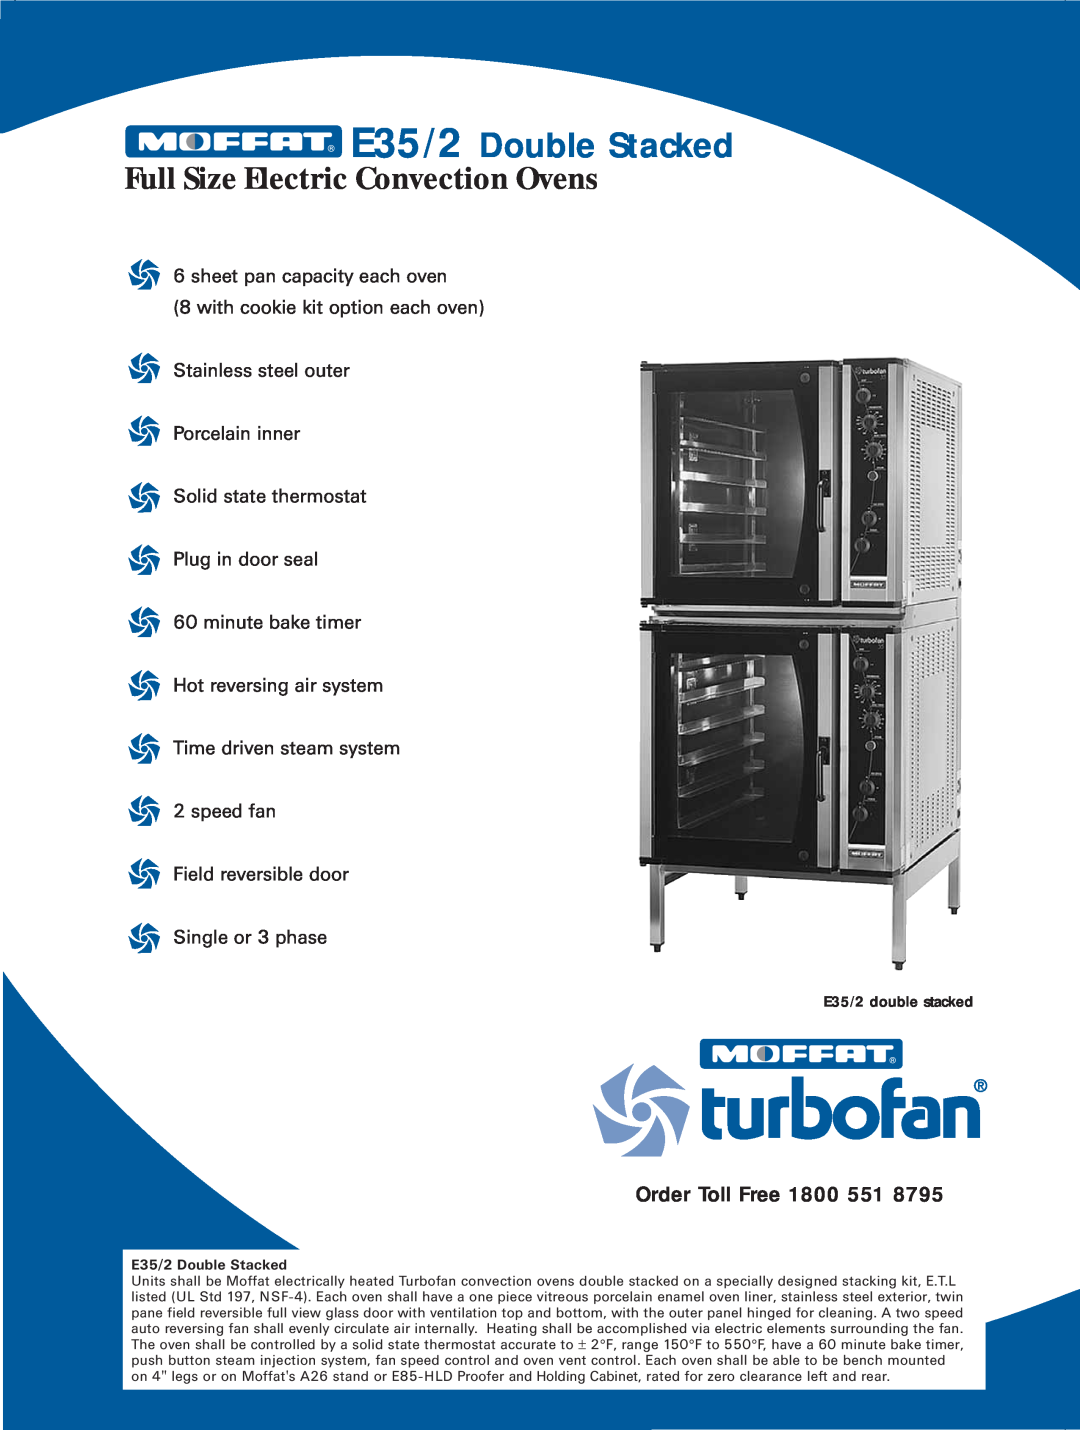 Moffat manual E35/2 Double Stacked, Full Size Electric Convection Ovens, E35/2 double stacked, Order Toll Free 